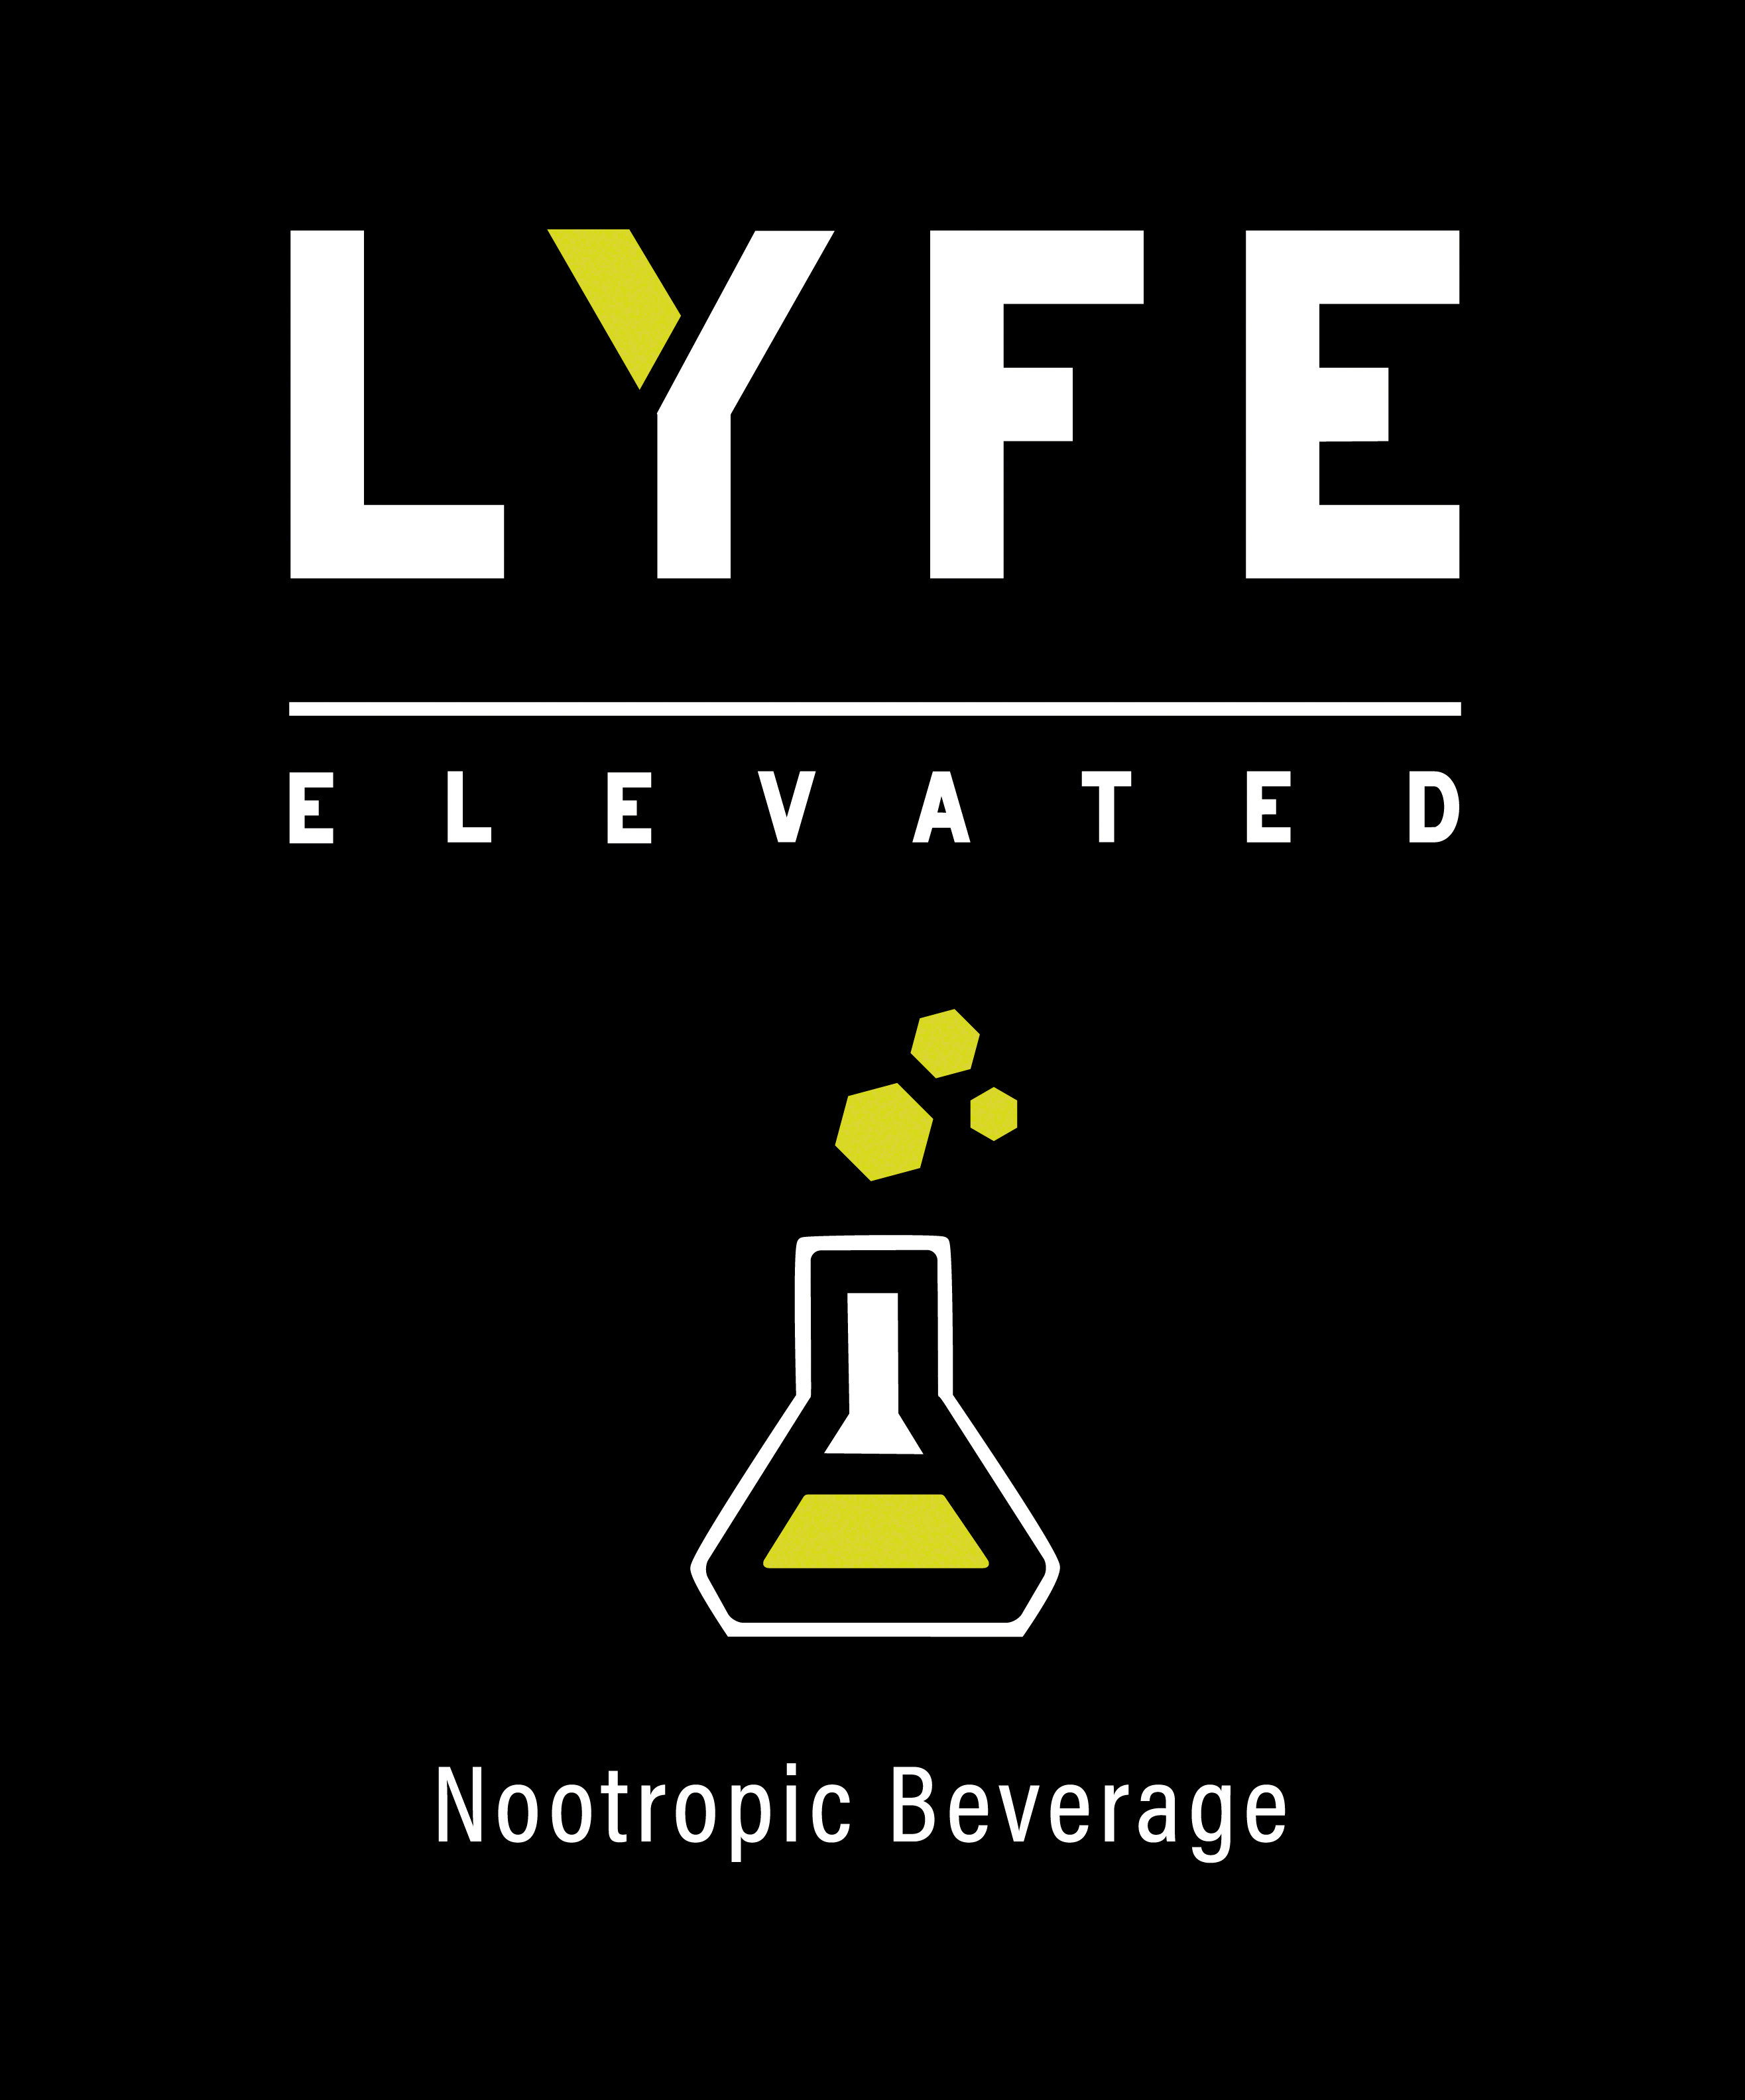 Dalya Kandil\'s Logo and Brand Design for Lyfe Elevated, Formulated and Marketing by Michael Ulisse